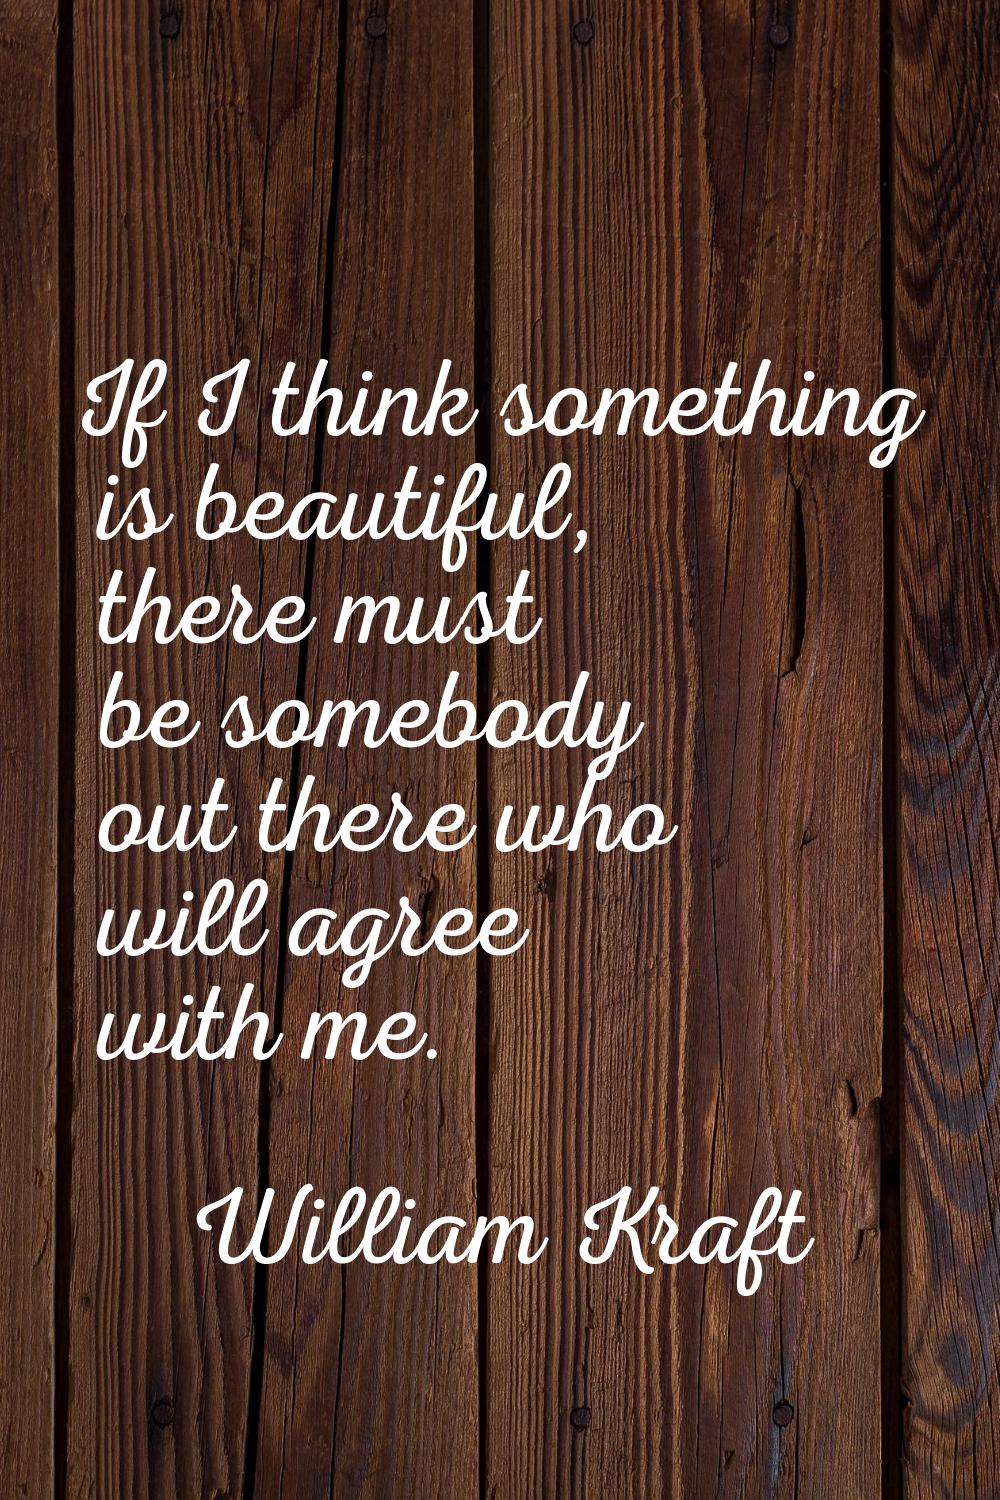 If I think something is beautiful, there must be somebody out there who will agree with me.